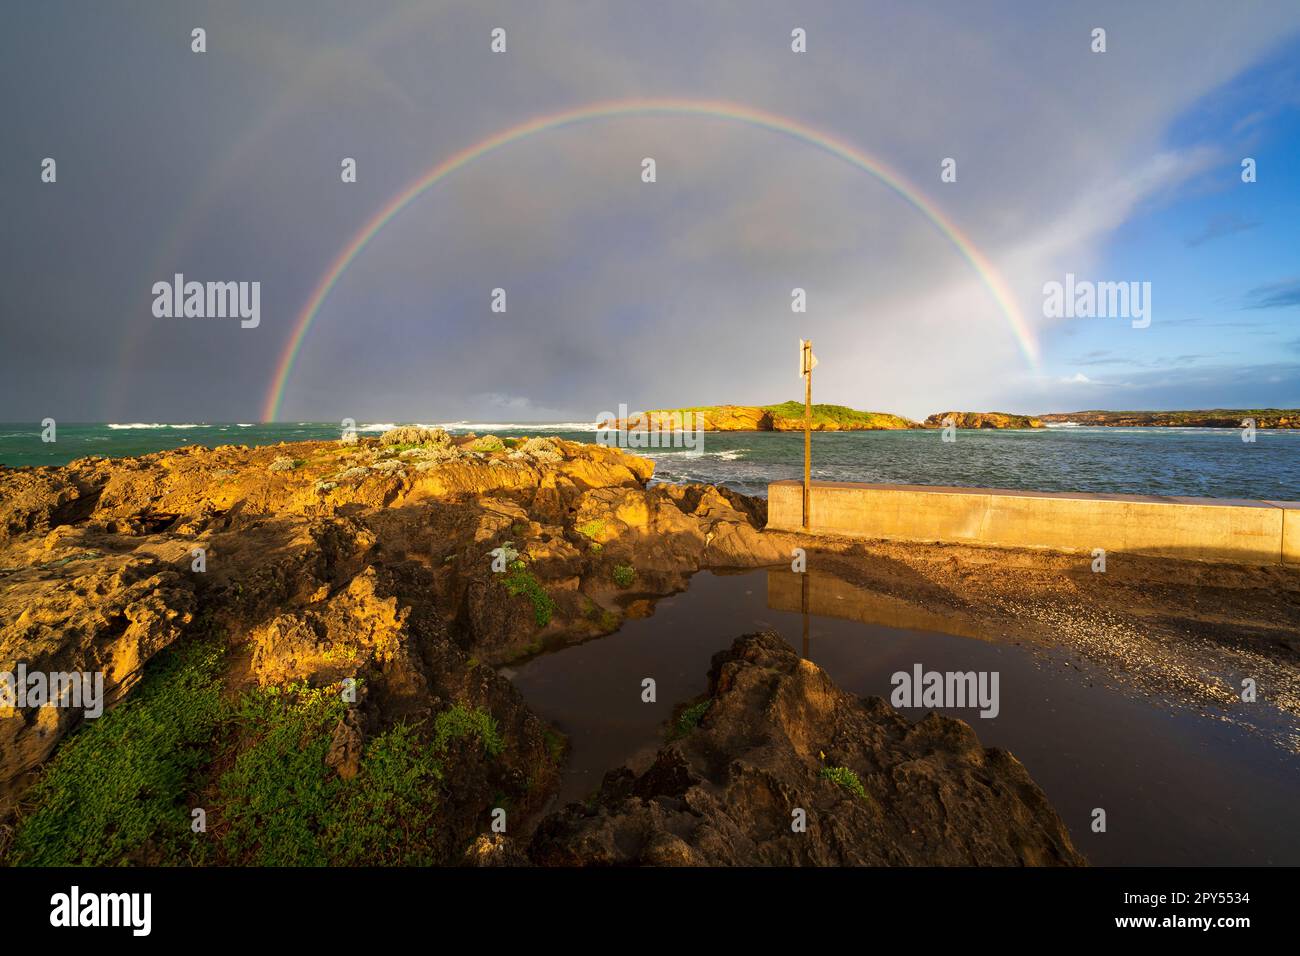 A double rainbow in front of a dark storm cloud over a rocky coastline at Warrnambool on the Great Ocean road in Victoria, Australia Stock Photo